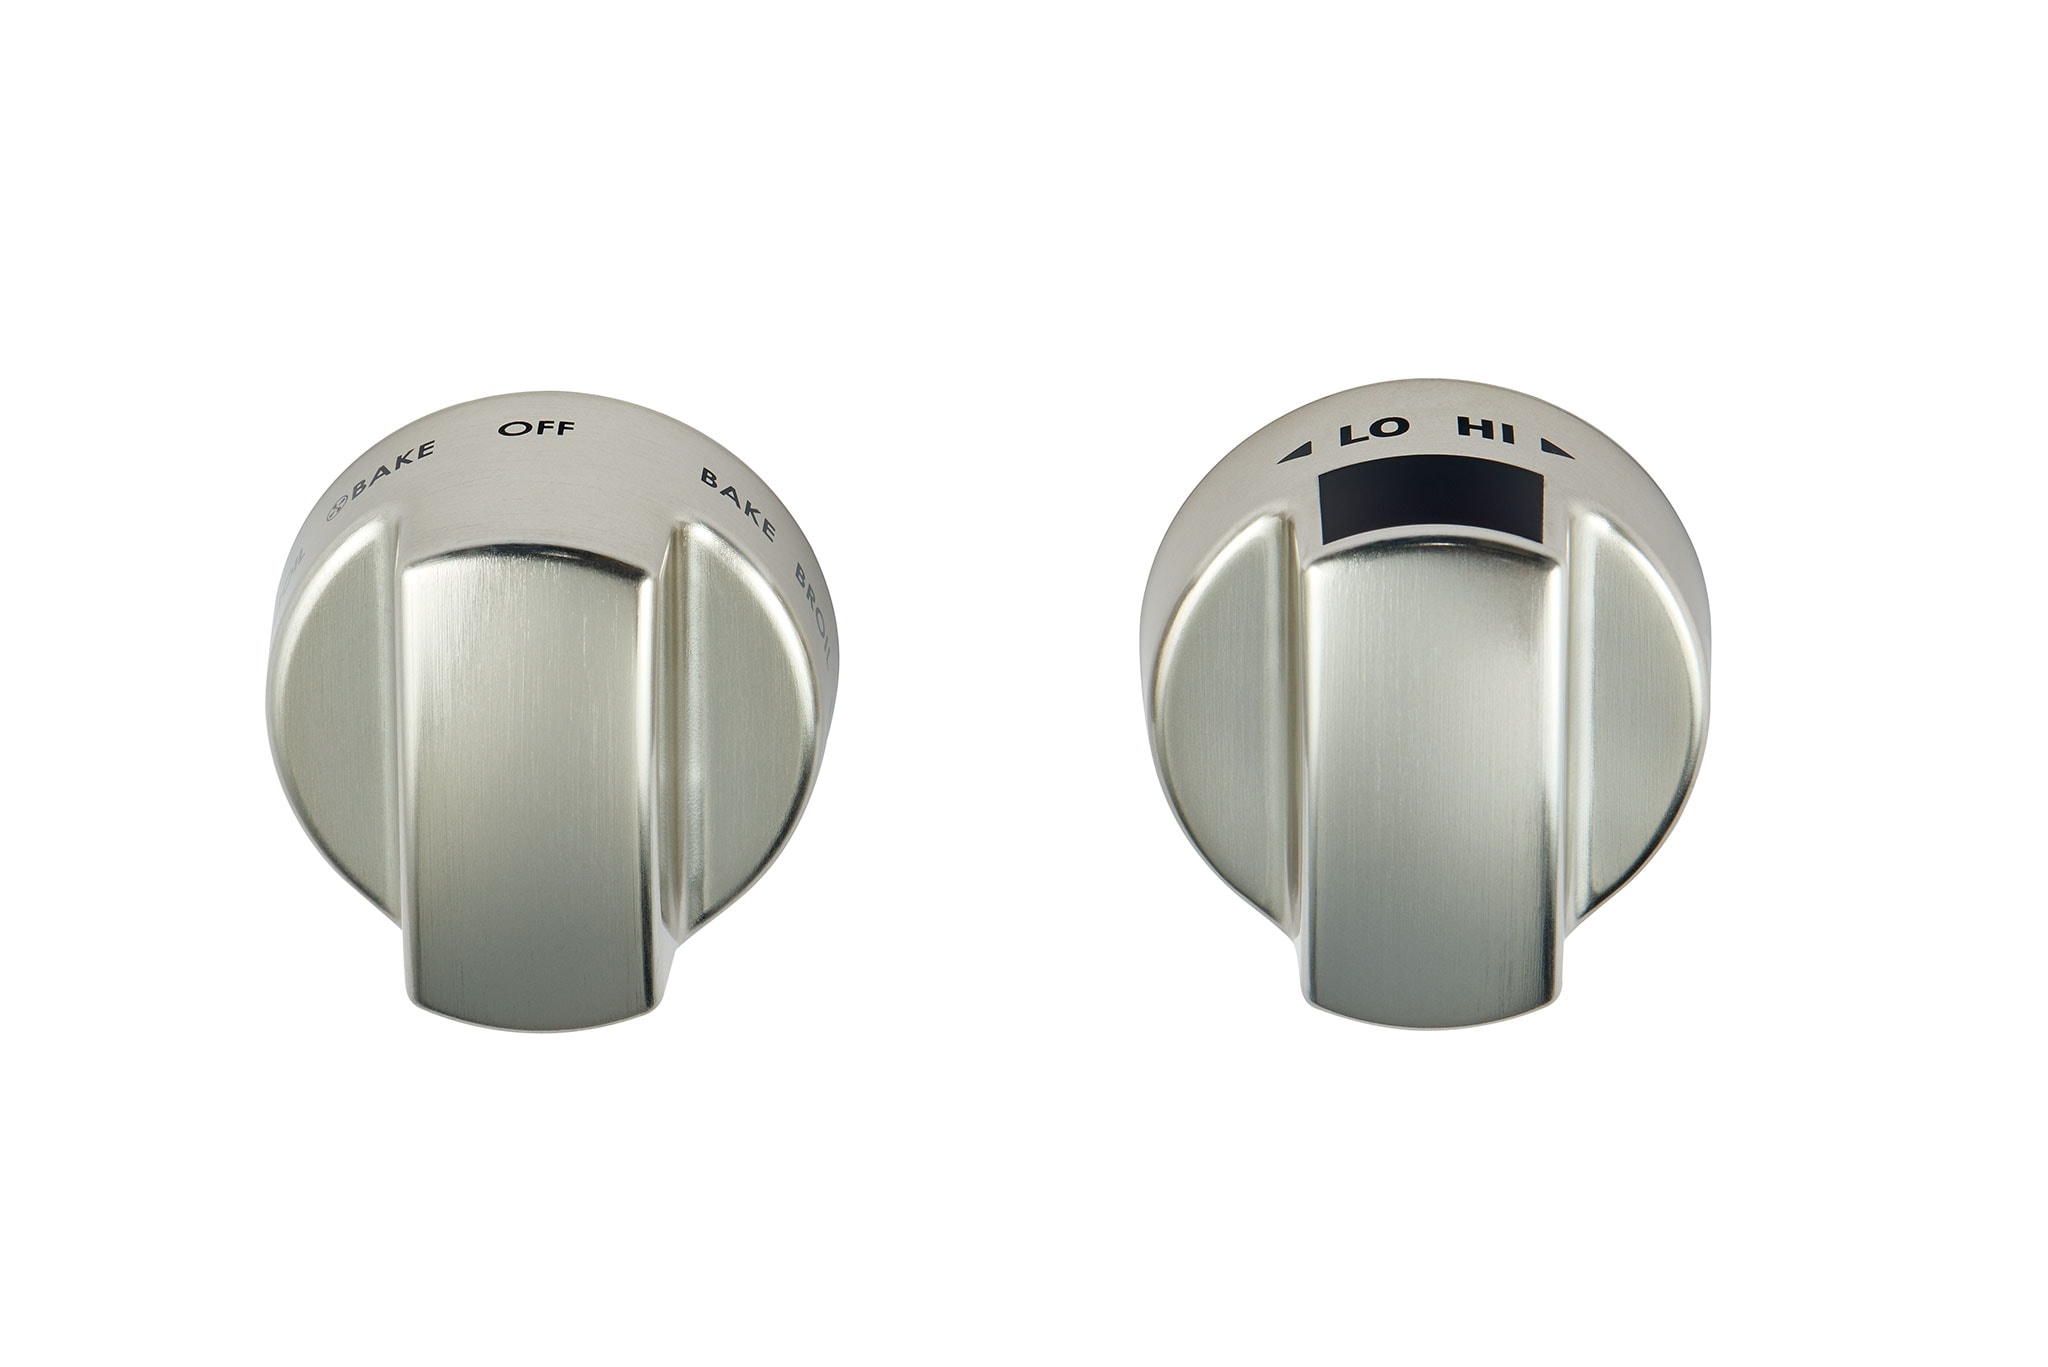 Induction Range Stainless Steel Knobs